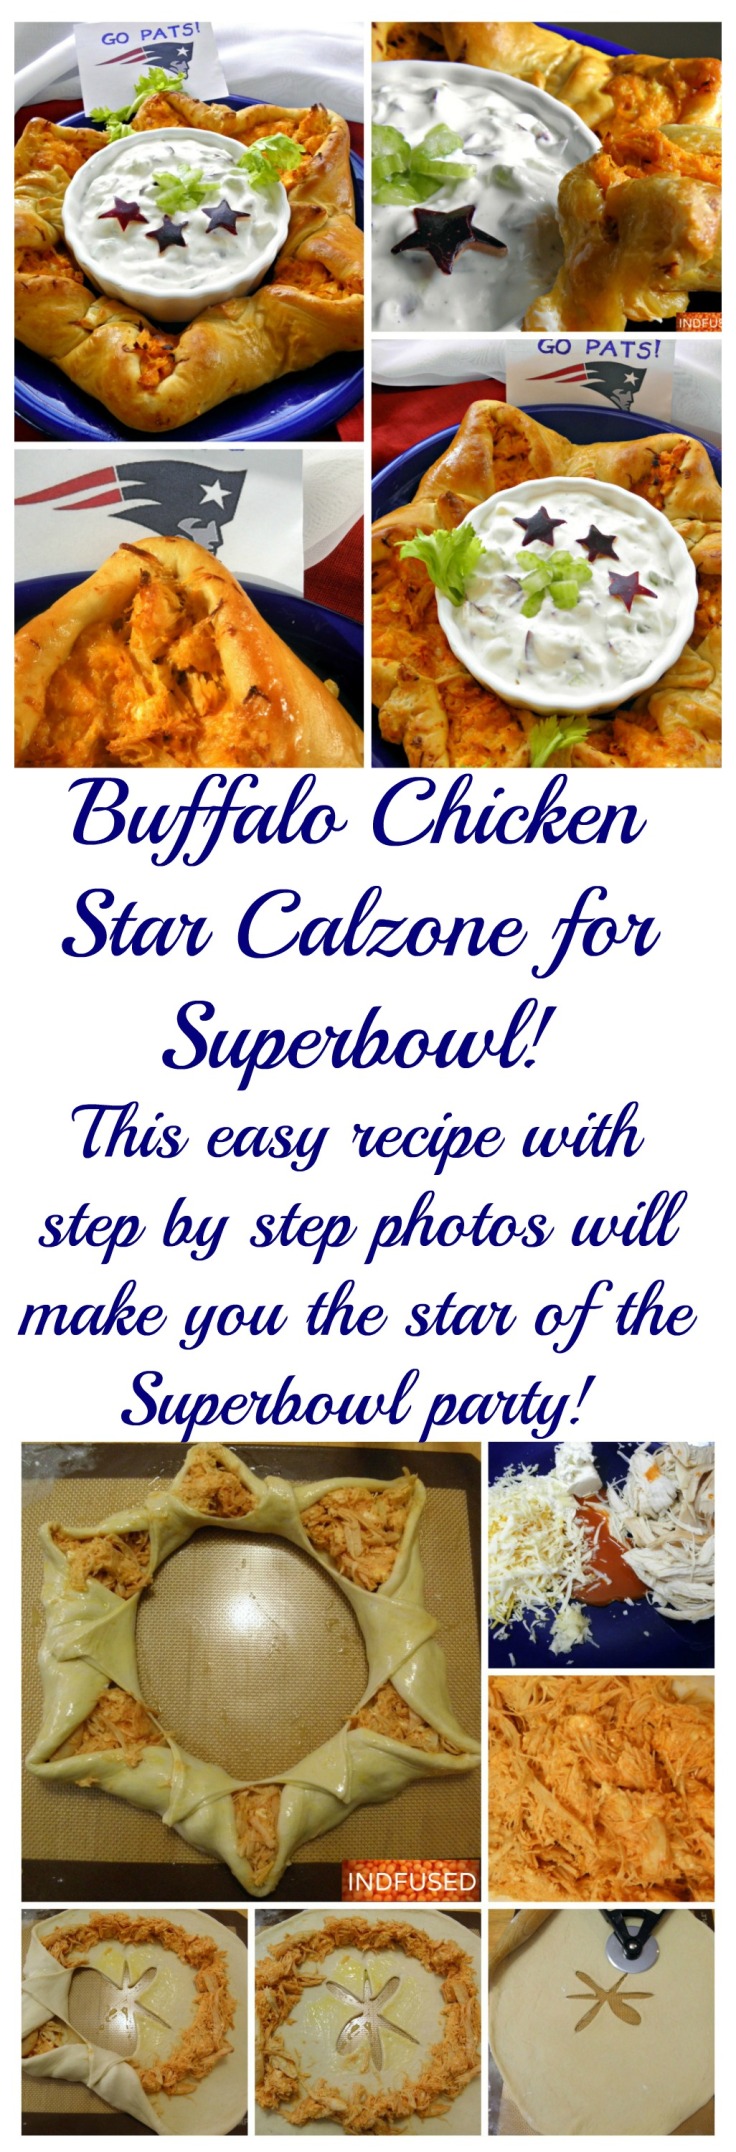 Easy recipe for #buffalochicken #calzone for #superbowlparty